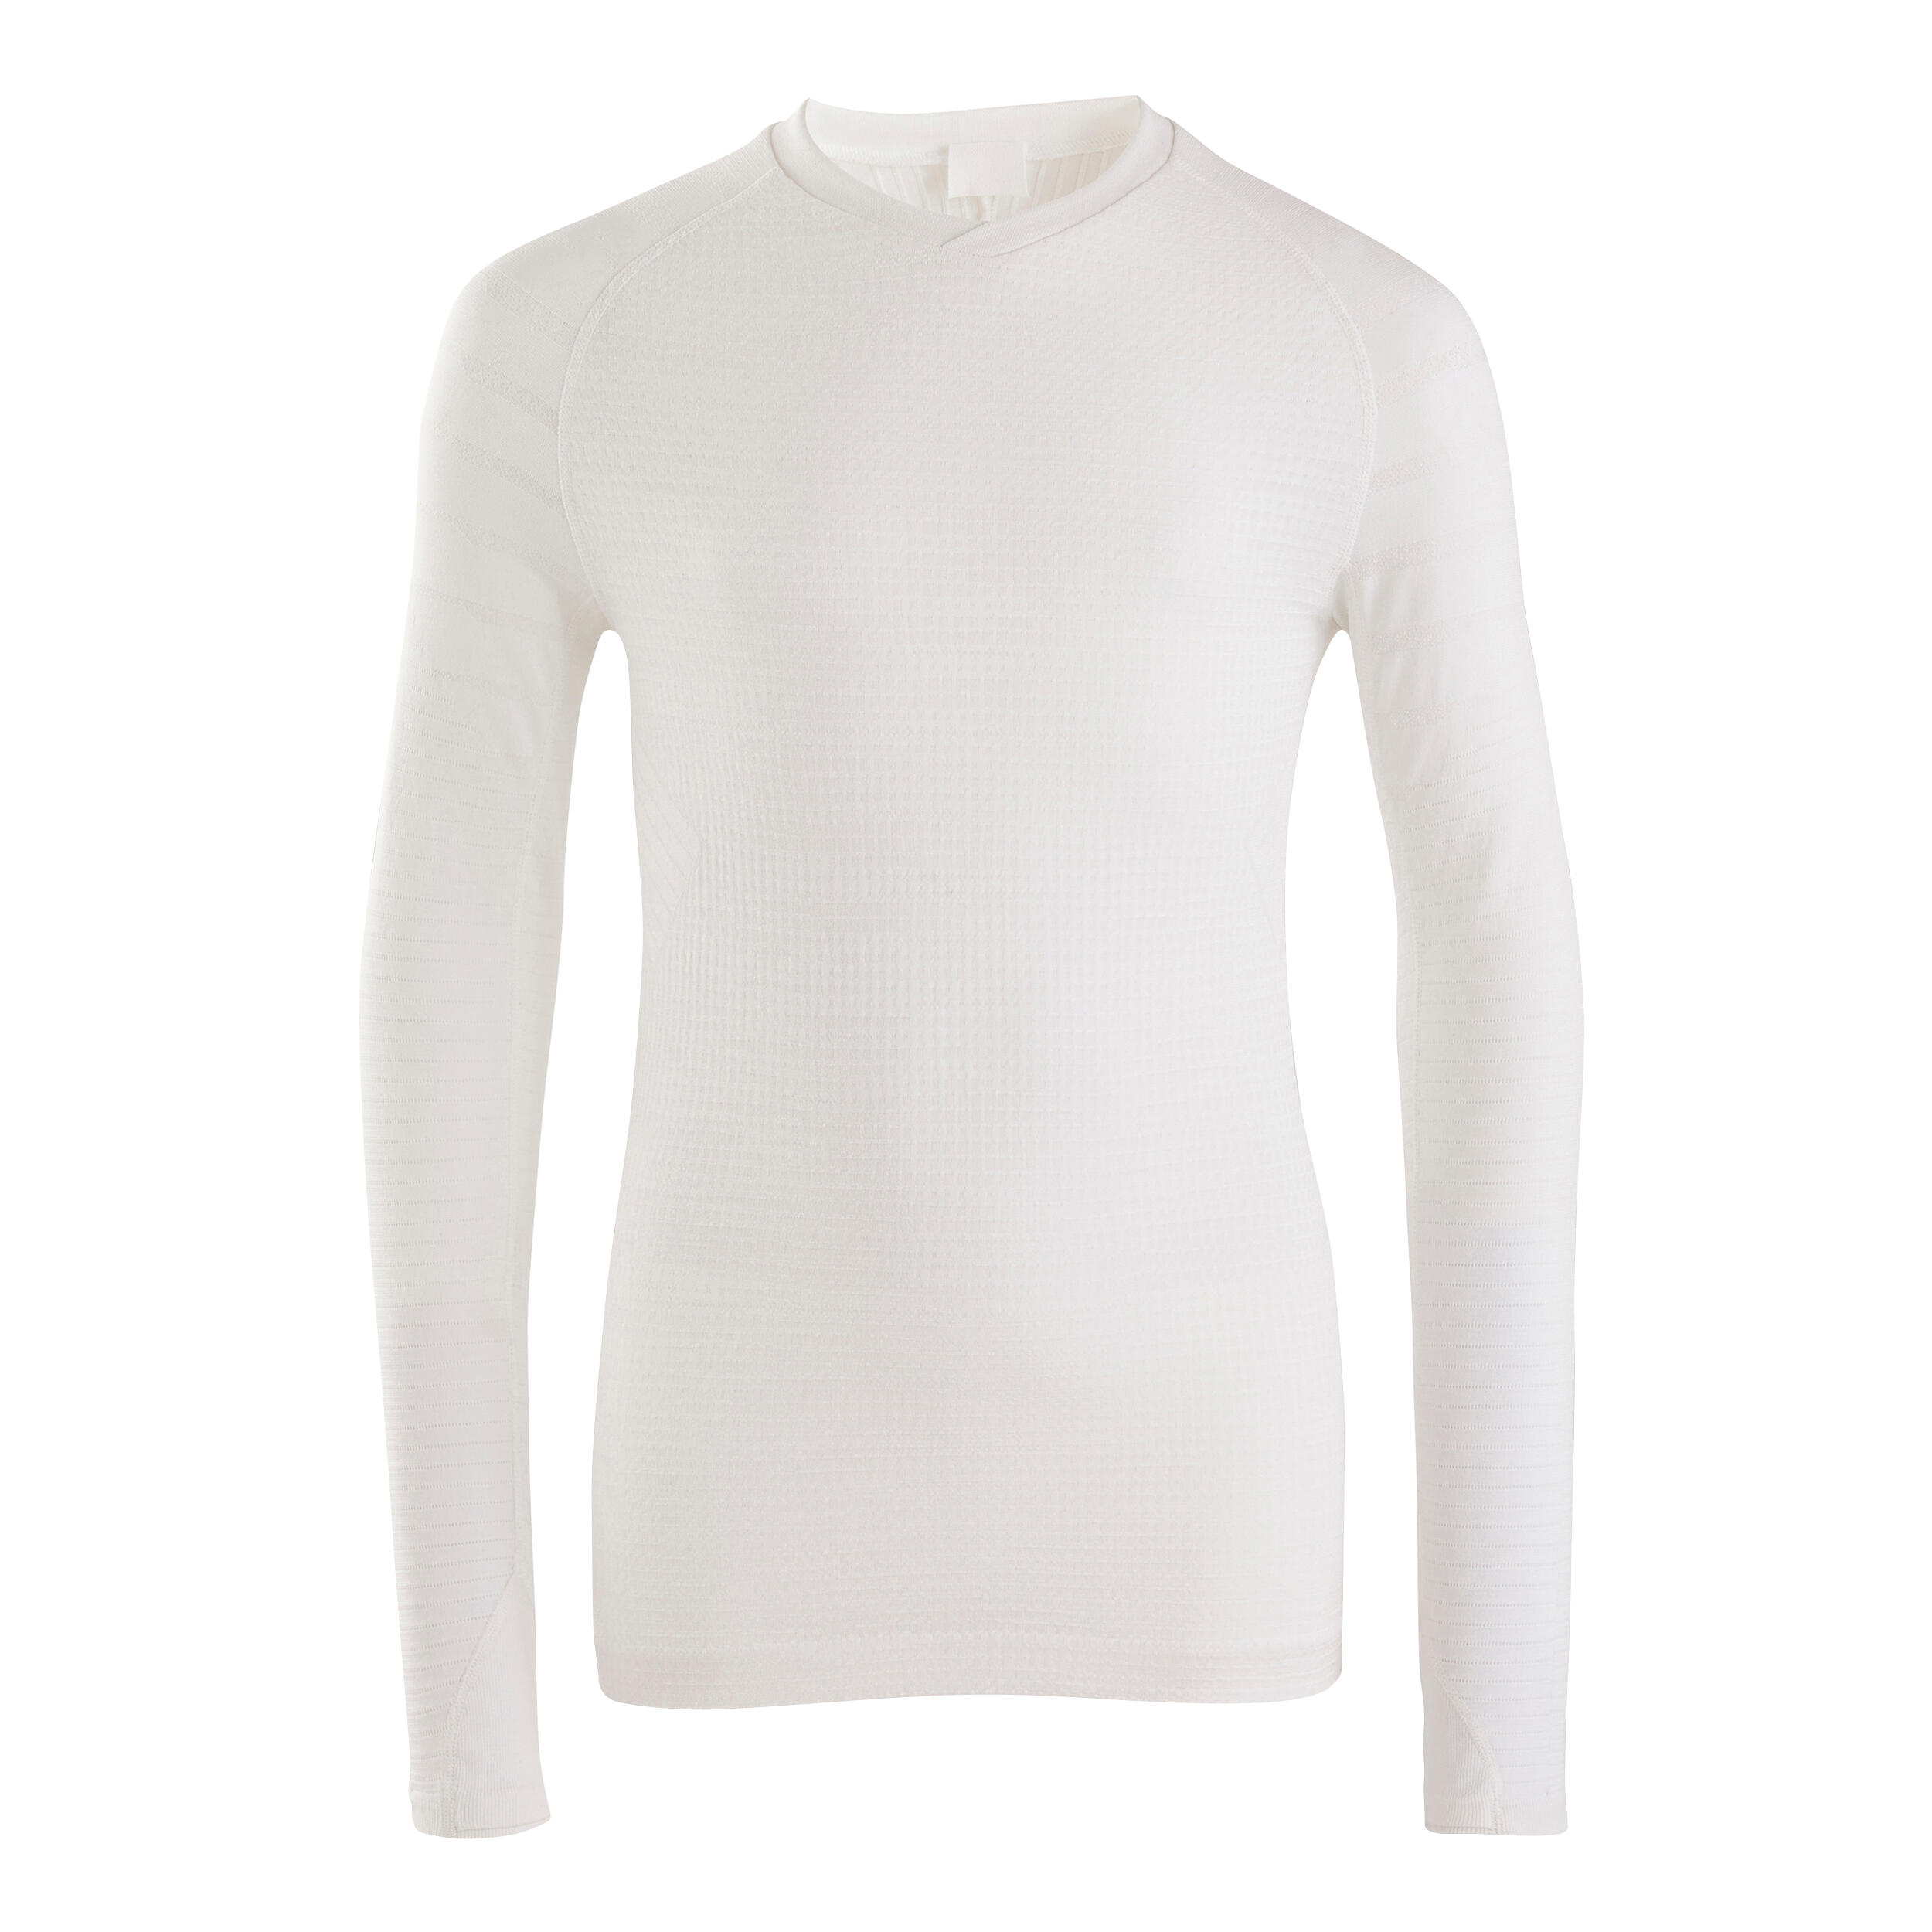 Kids' Long-Sleeved Thermal Base Layer Top Keepdry 500 - White 2/11